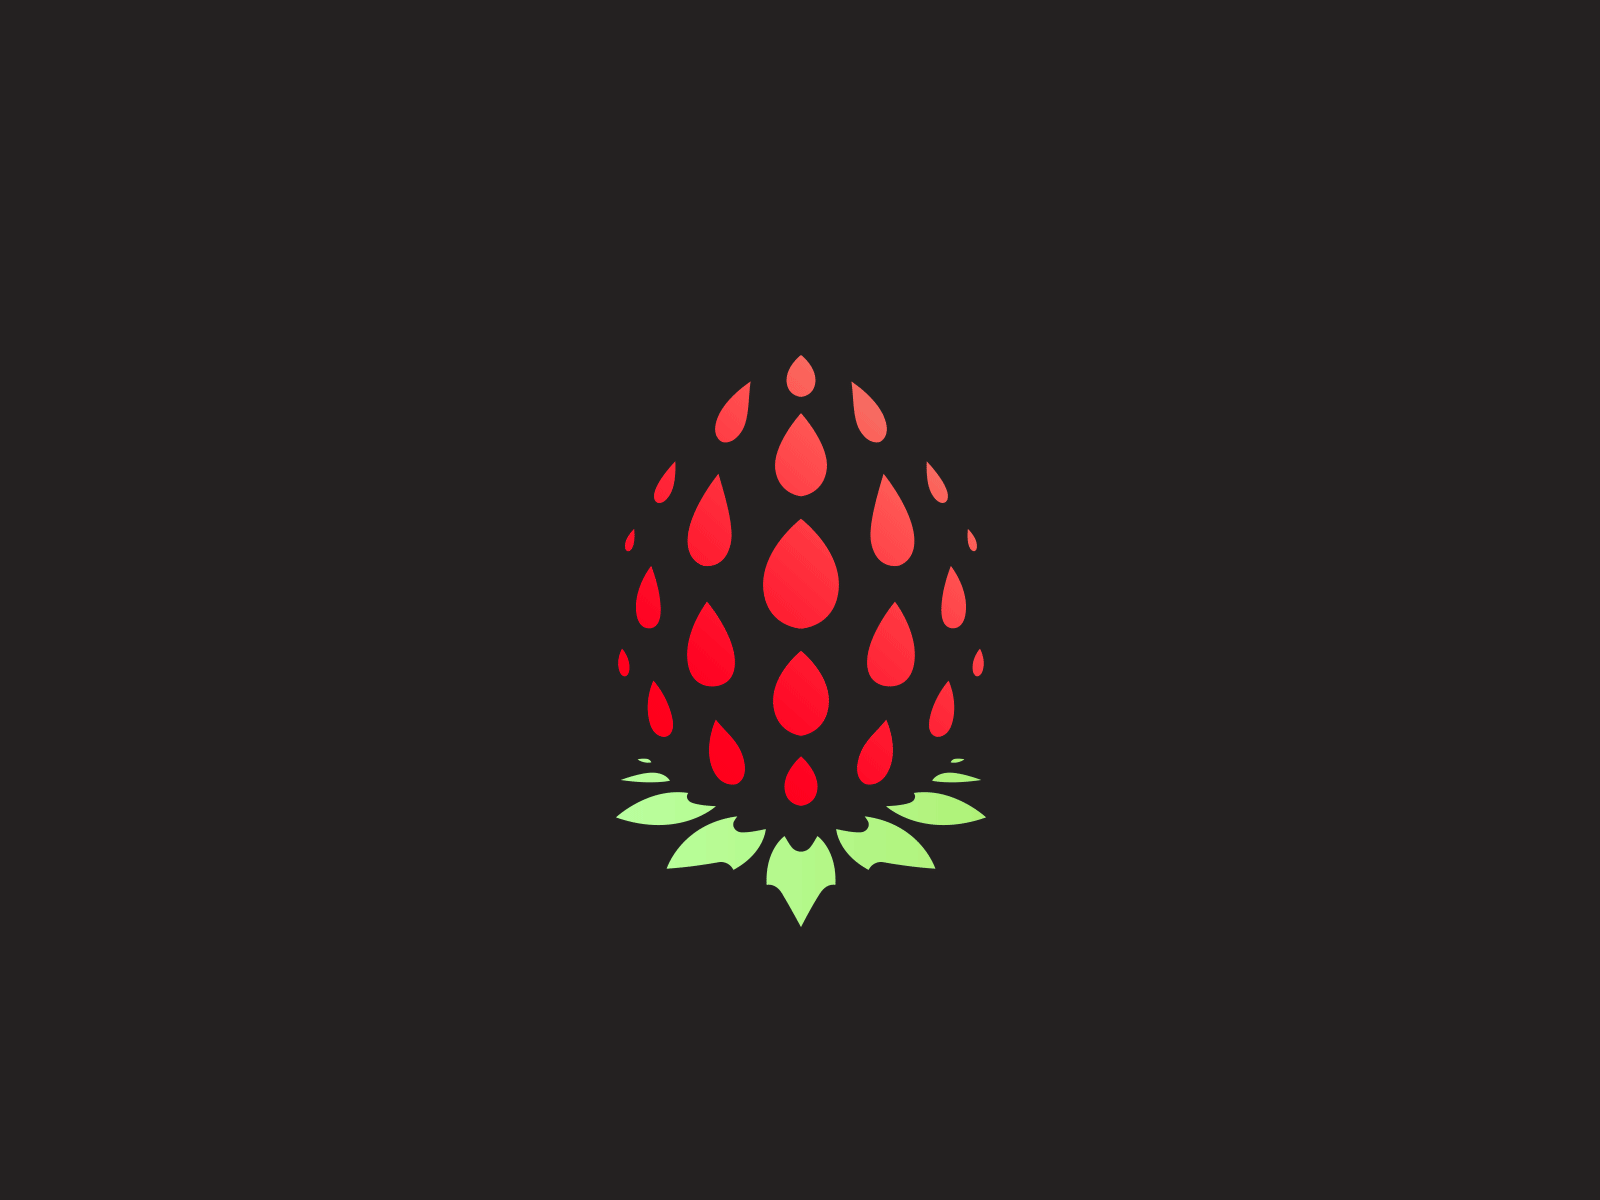 Fireberry berry bonpit fire firepit flame fruit fruity healthy leaf logo nature pit strawberry